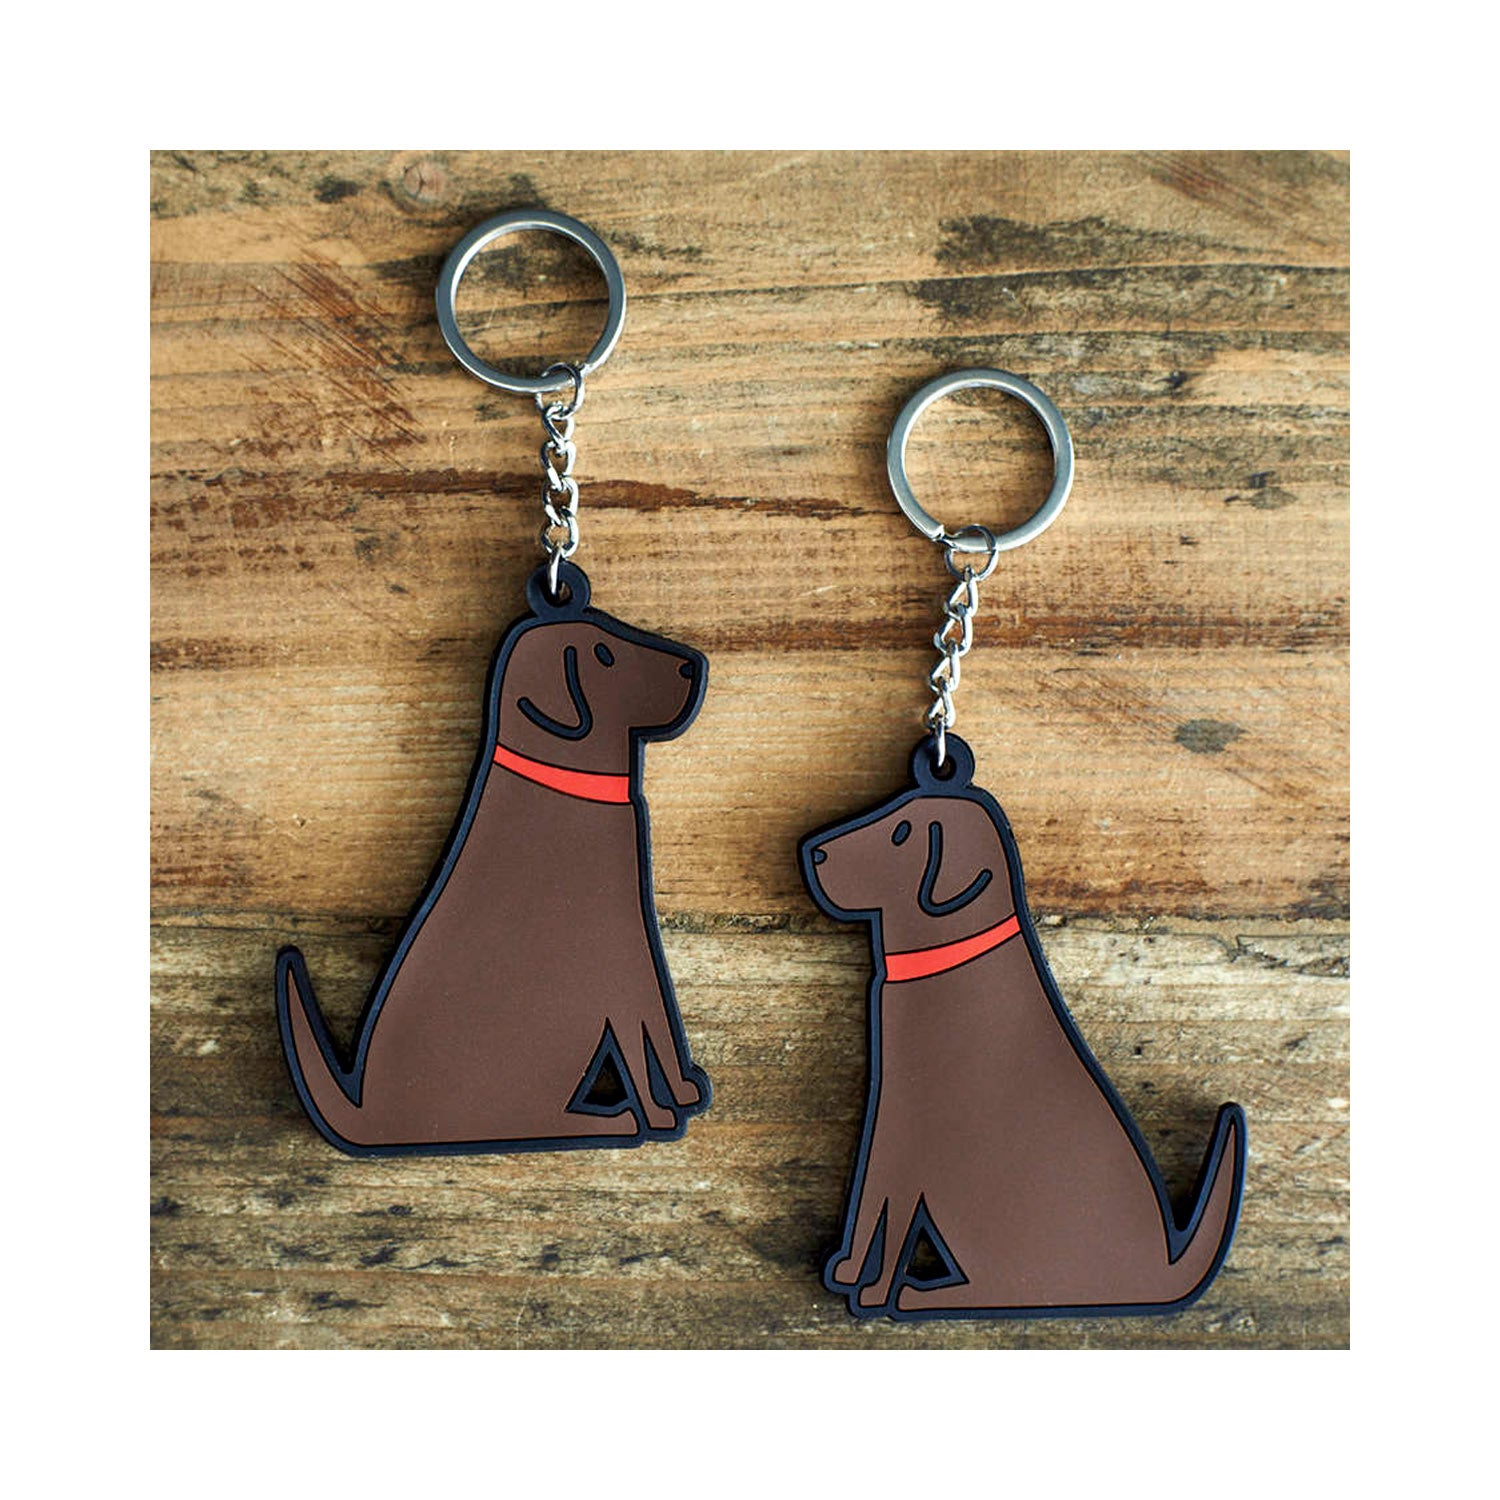 Dog Lover Gifts available at Dog Krazy Gifts - Grace the Chocolate Labrador Keyring - part of the Sweet William range available from Dog Krazy Gifts